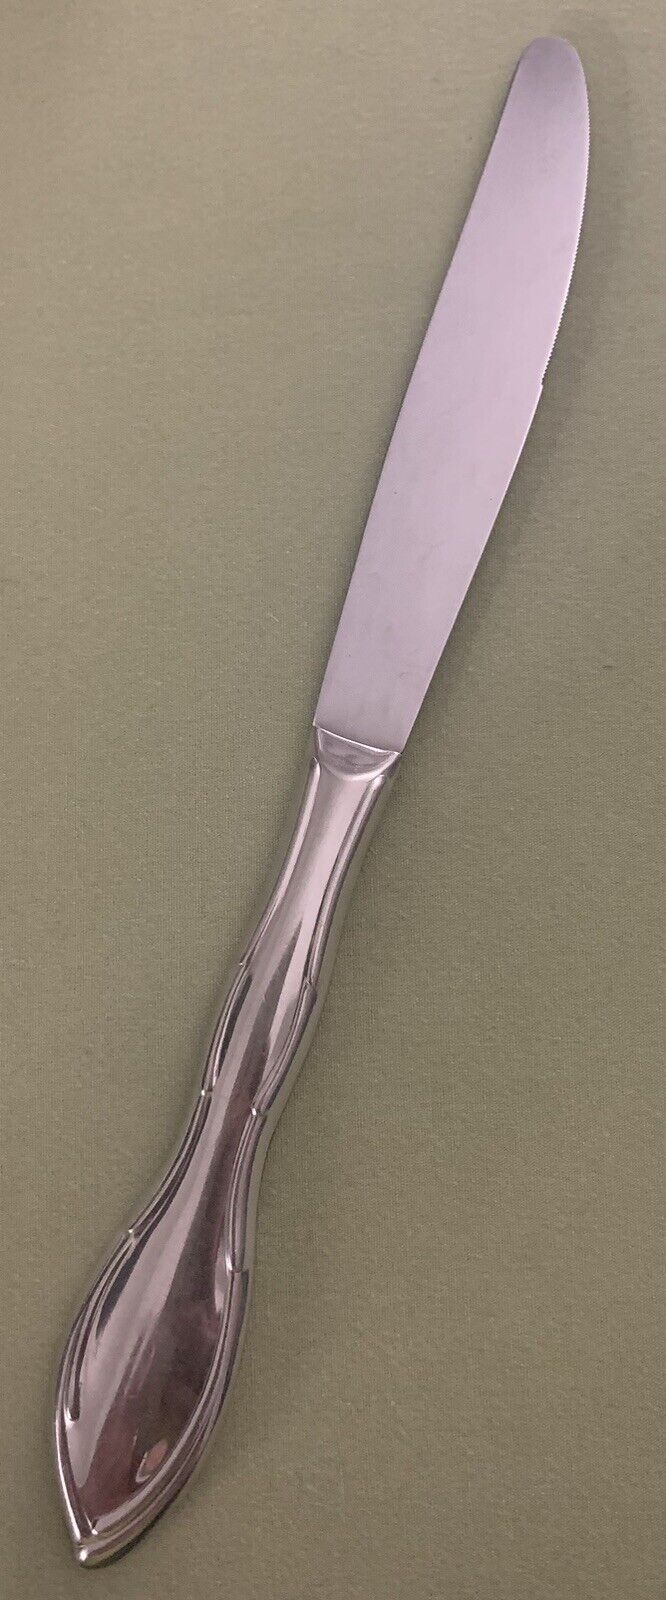 Vintage CHANSON by Gorham Stegor DINNER KNIFE Hollow Handle Stainless 8-1/2” USA